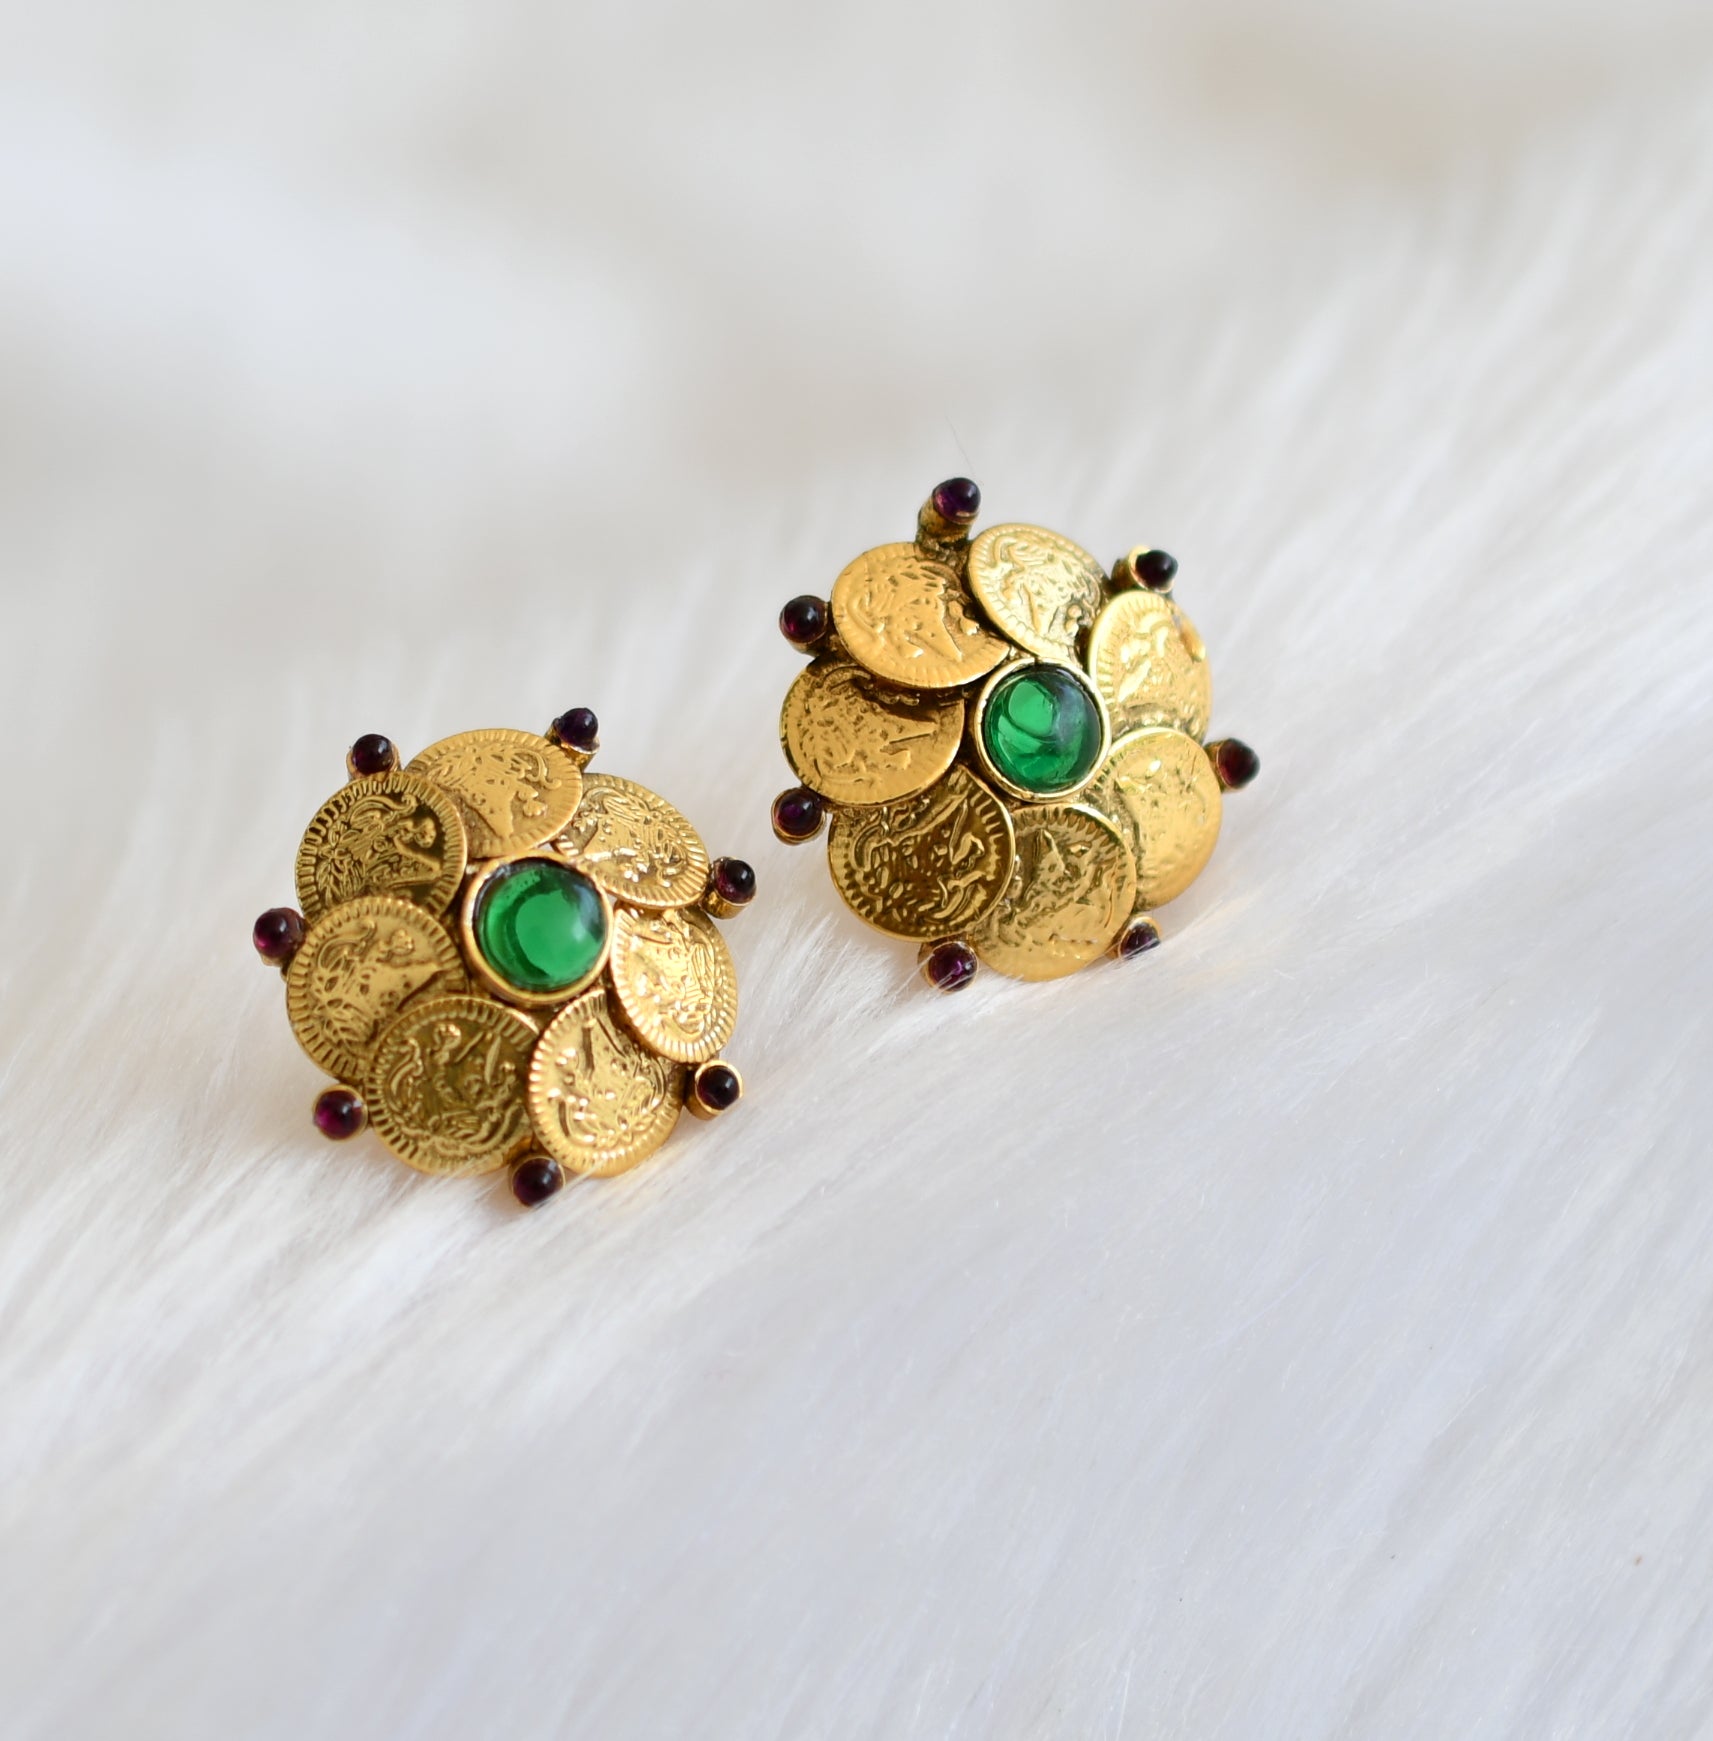 Antique Gold Peacock Jhumkis photo | Temple jewellery earrings, Matte gold  jewelry, Antique gold jewelry indian